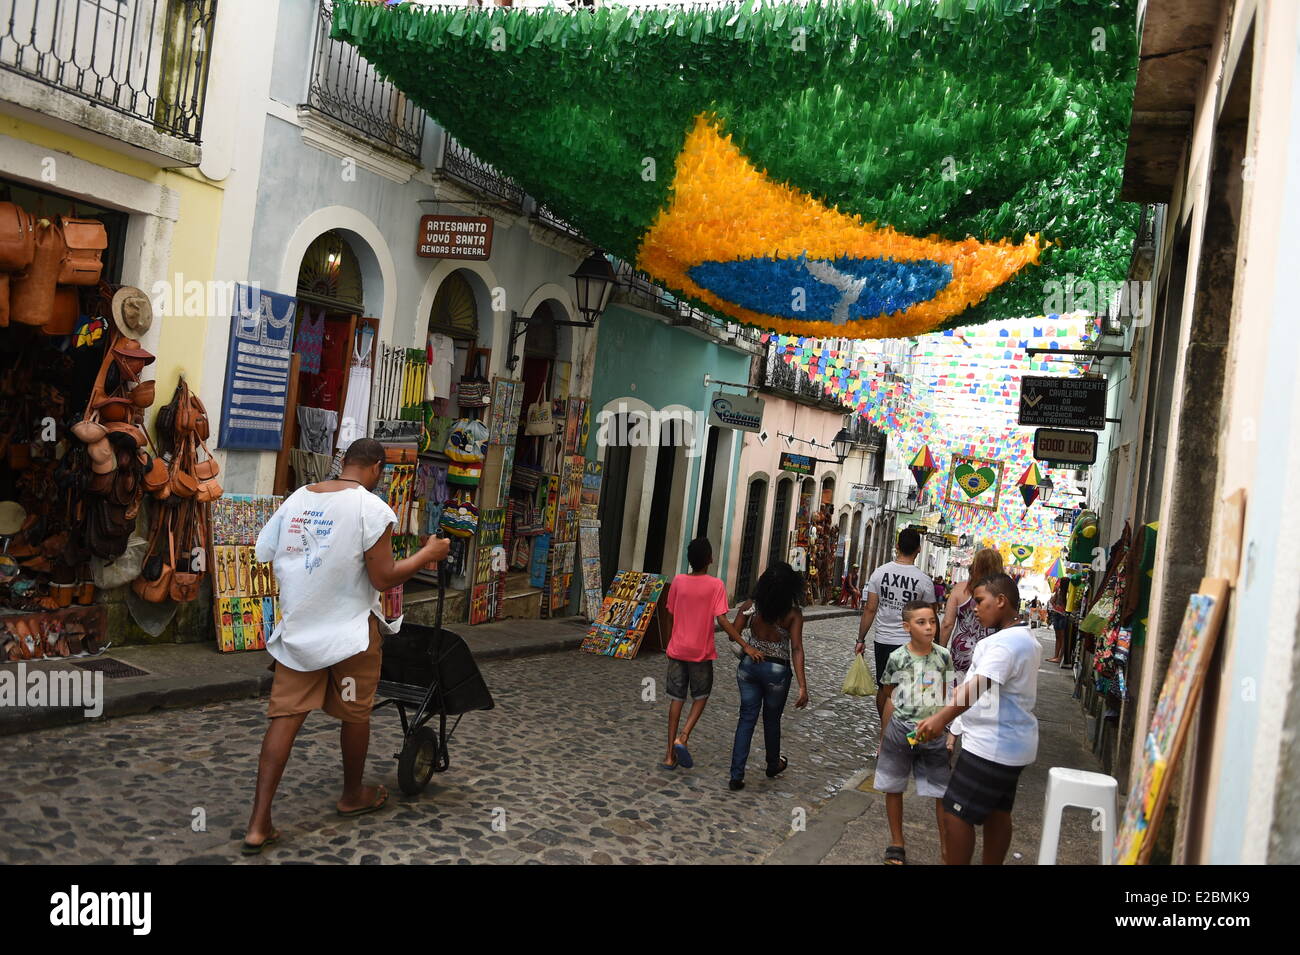 A Brazilian flag decorate a street in Salvador Brazil, 18 June 2014. The FIFA World Cup will take place in Brazil from 12 June to 13 July 2014. Photo: Marius Becker/dpa Stock Photo